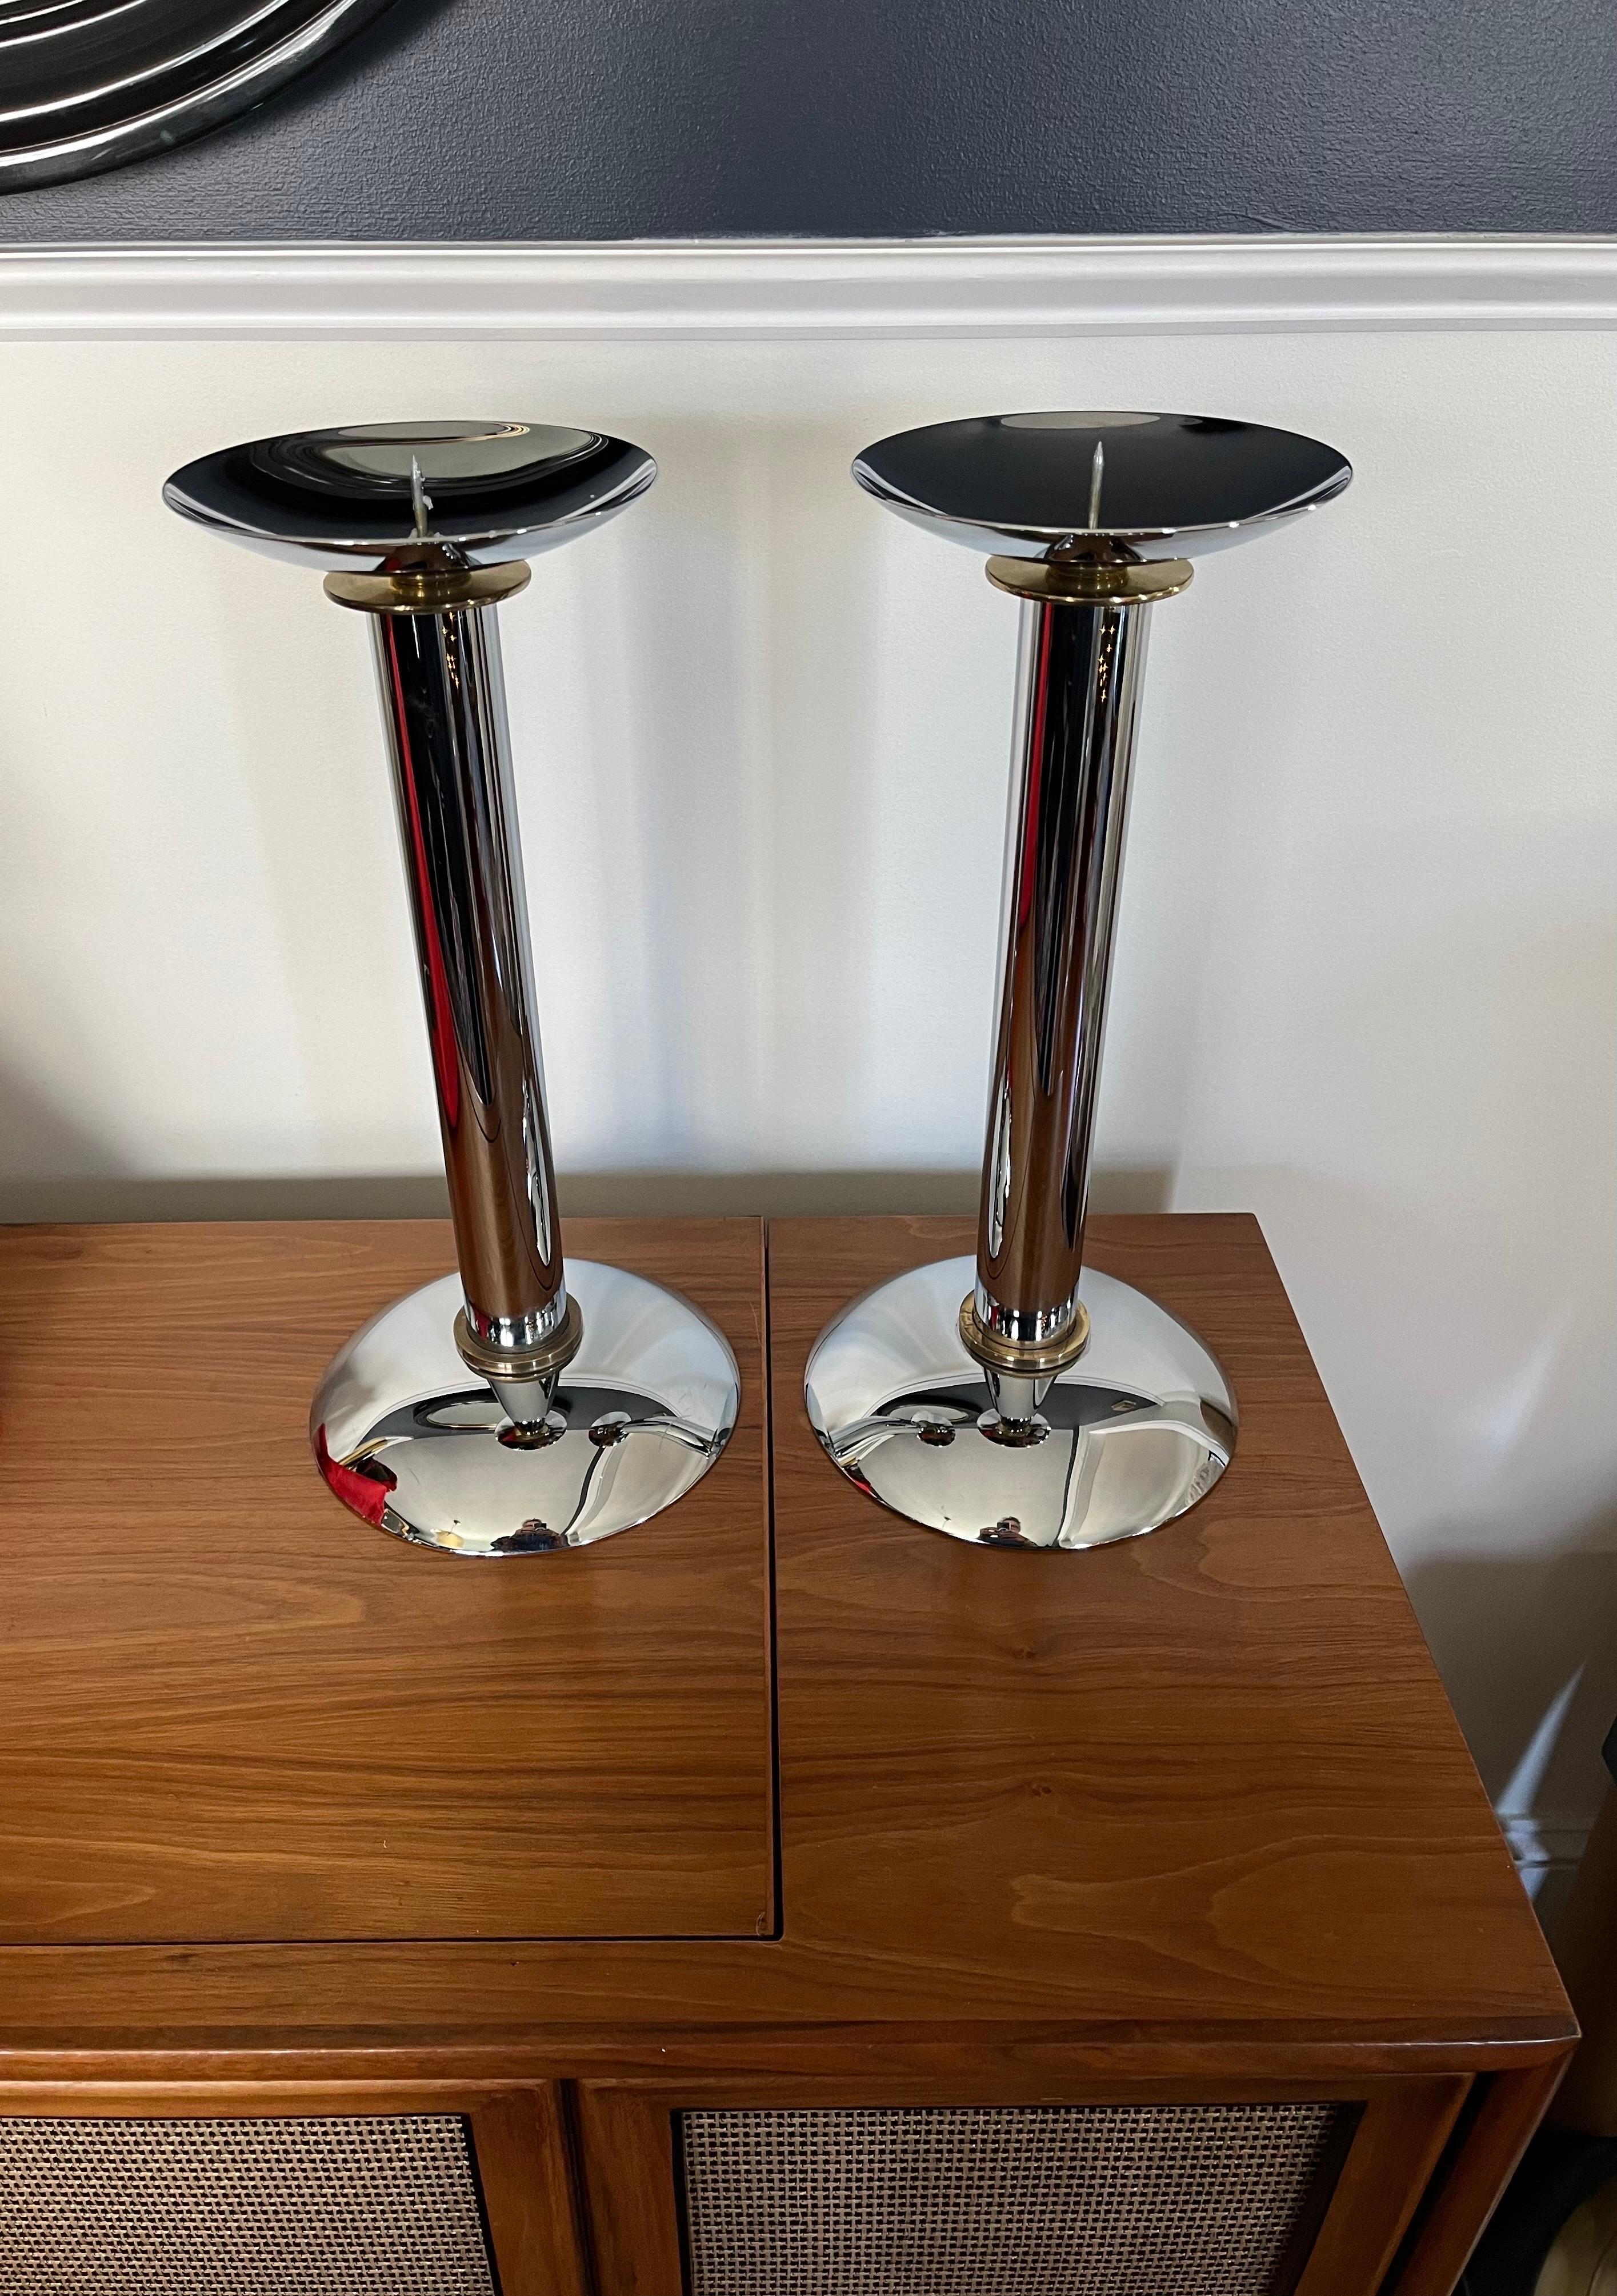 A rare pair of chrome and brass candlestick holders / candelabras by influential, important & renowned 20th Century German born American designer Karl Springer, circa 1985. Beautiful dimensions - large and oversized proportions.
Curbside to